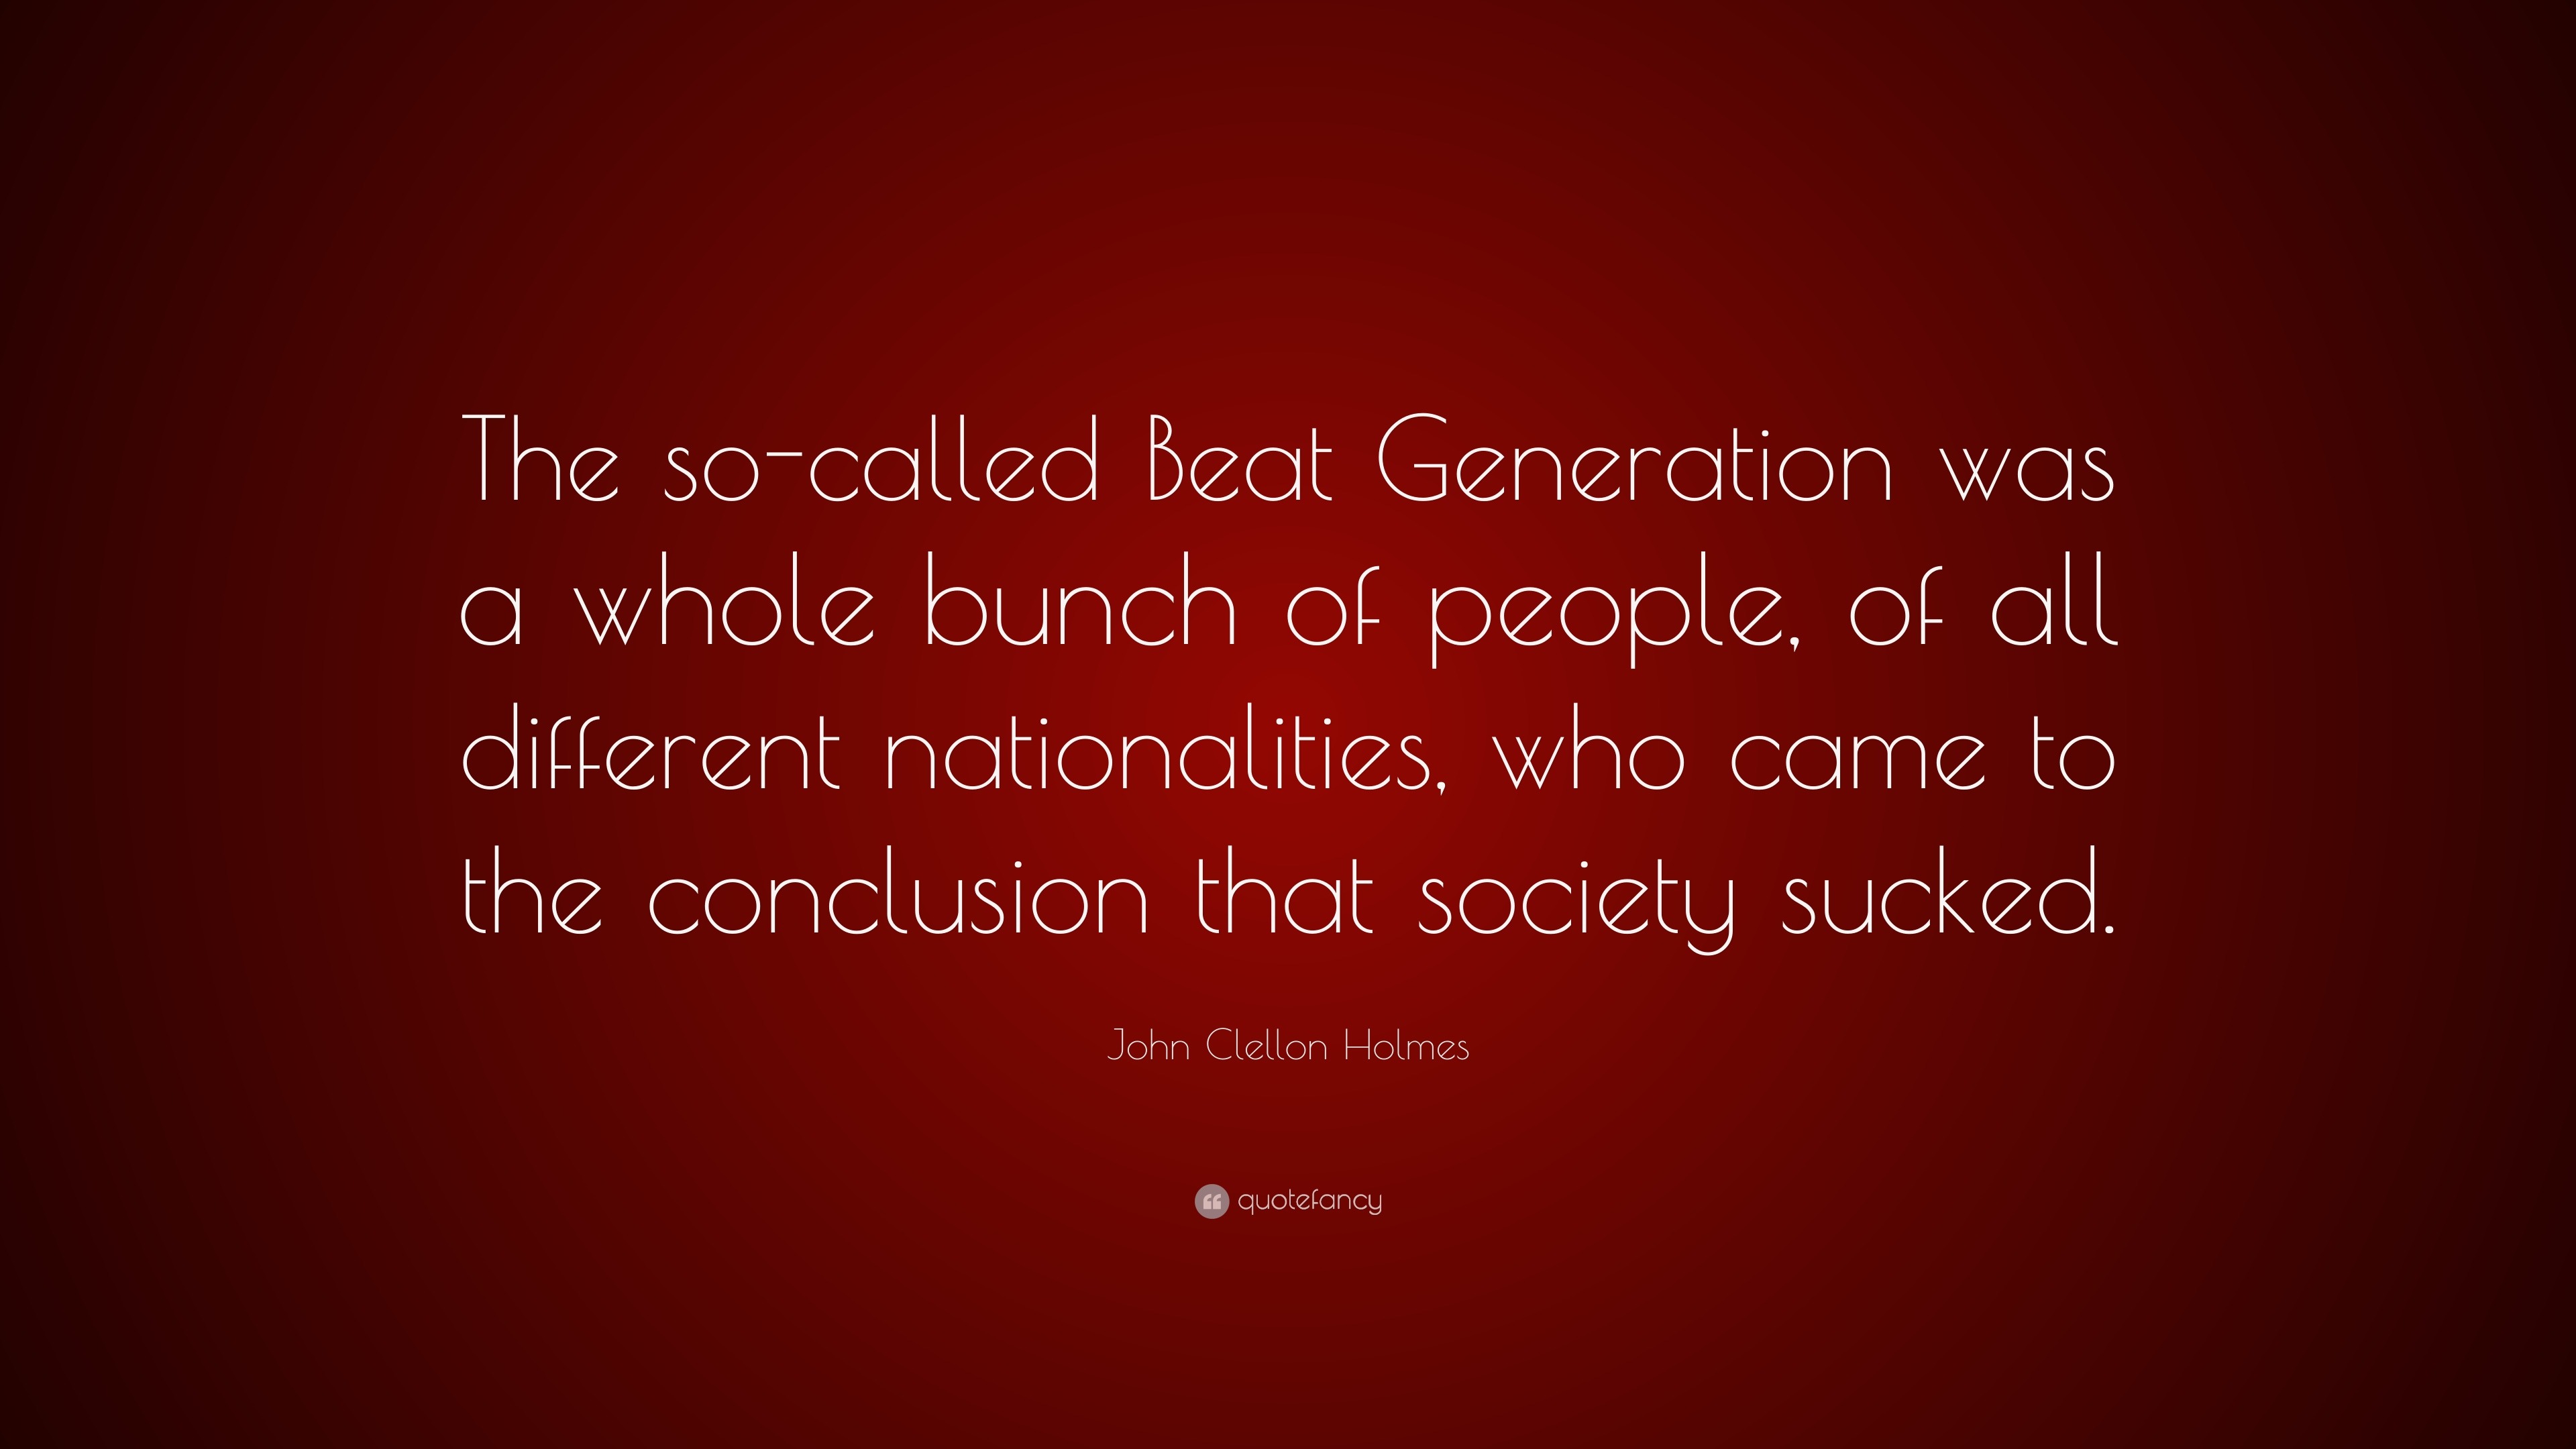 Clellon Holmes Quote: “The so-called Beat Generation was a whole bunch of people, of all different who to the conclusion th...”